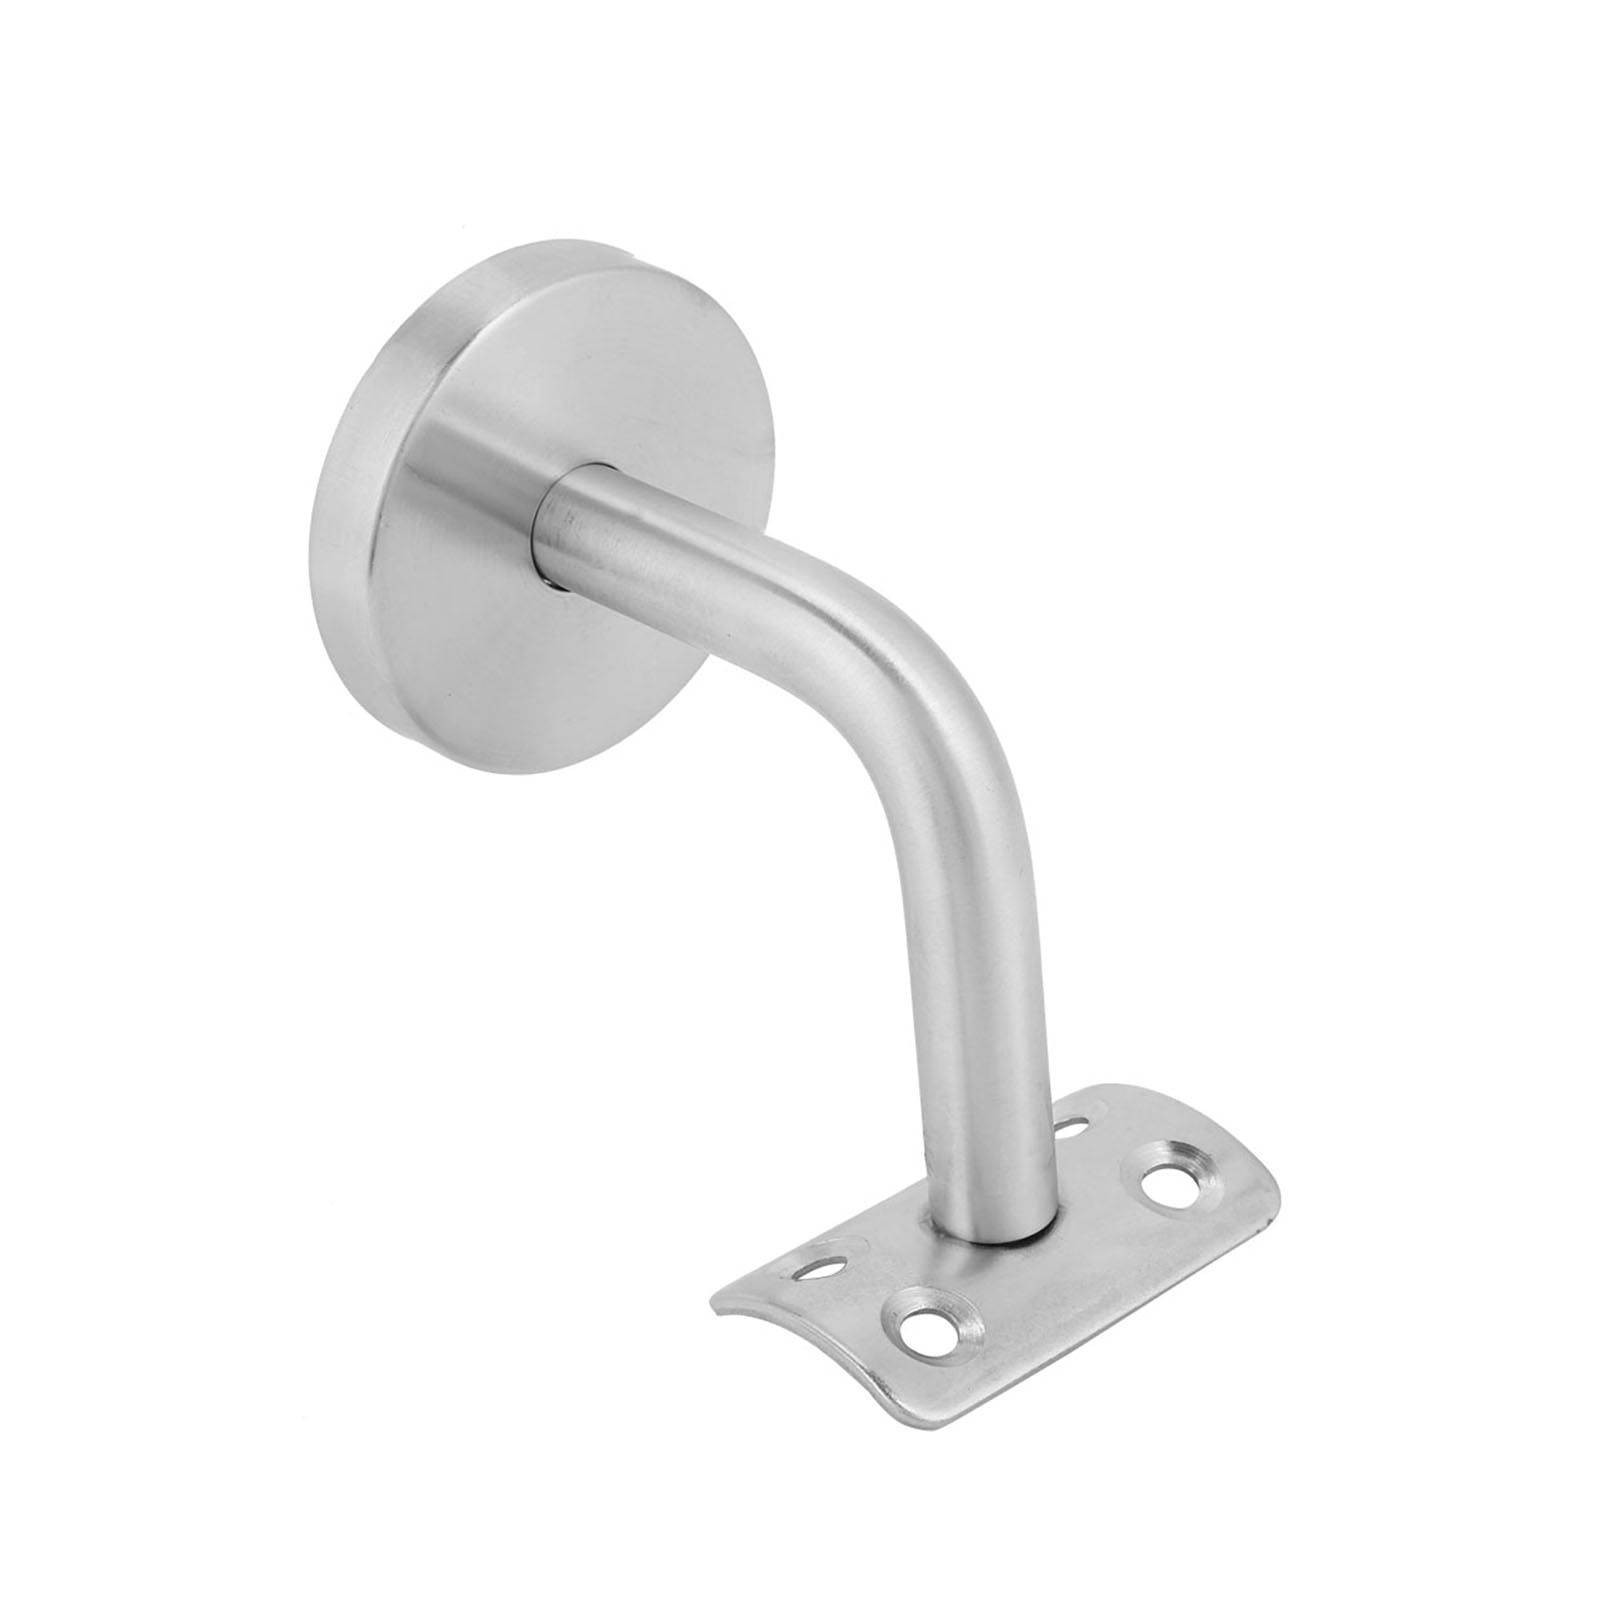 Stainless Steel Wall Mount Handrail Bracket 1/8 Thickness 